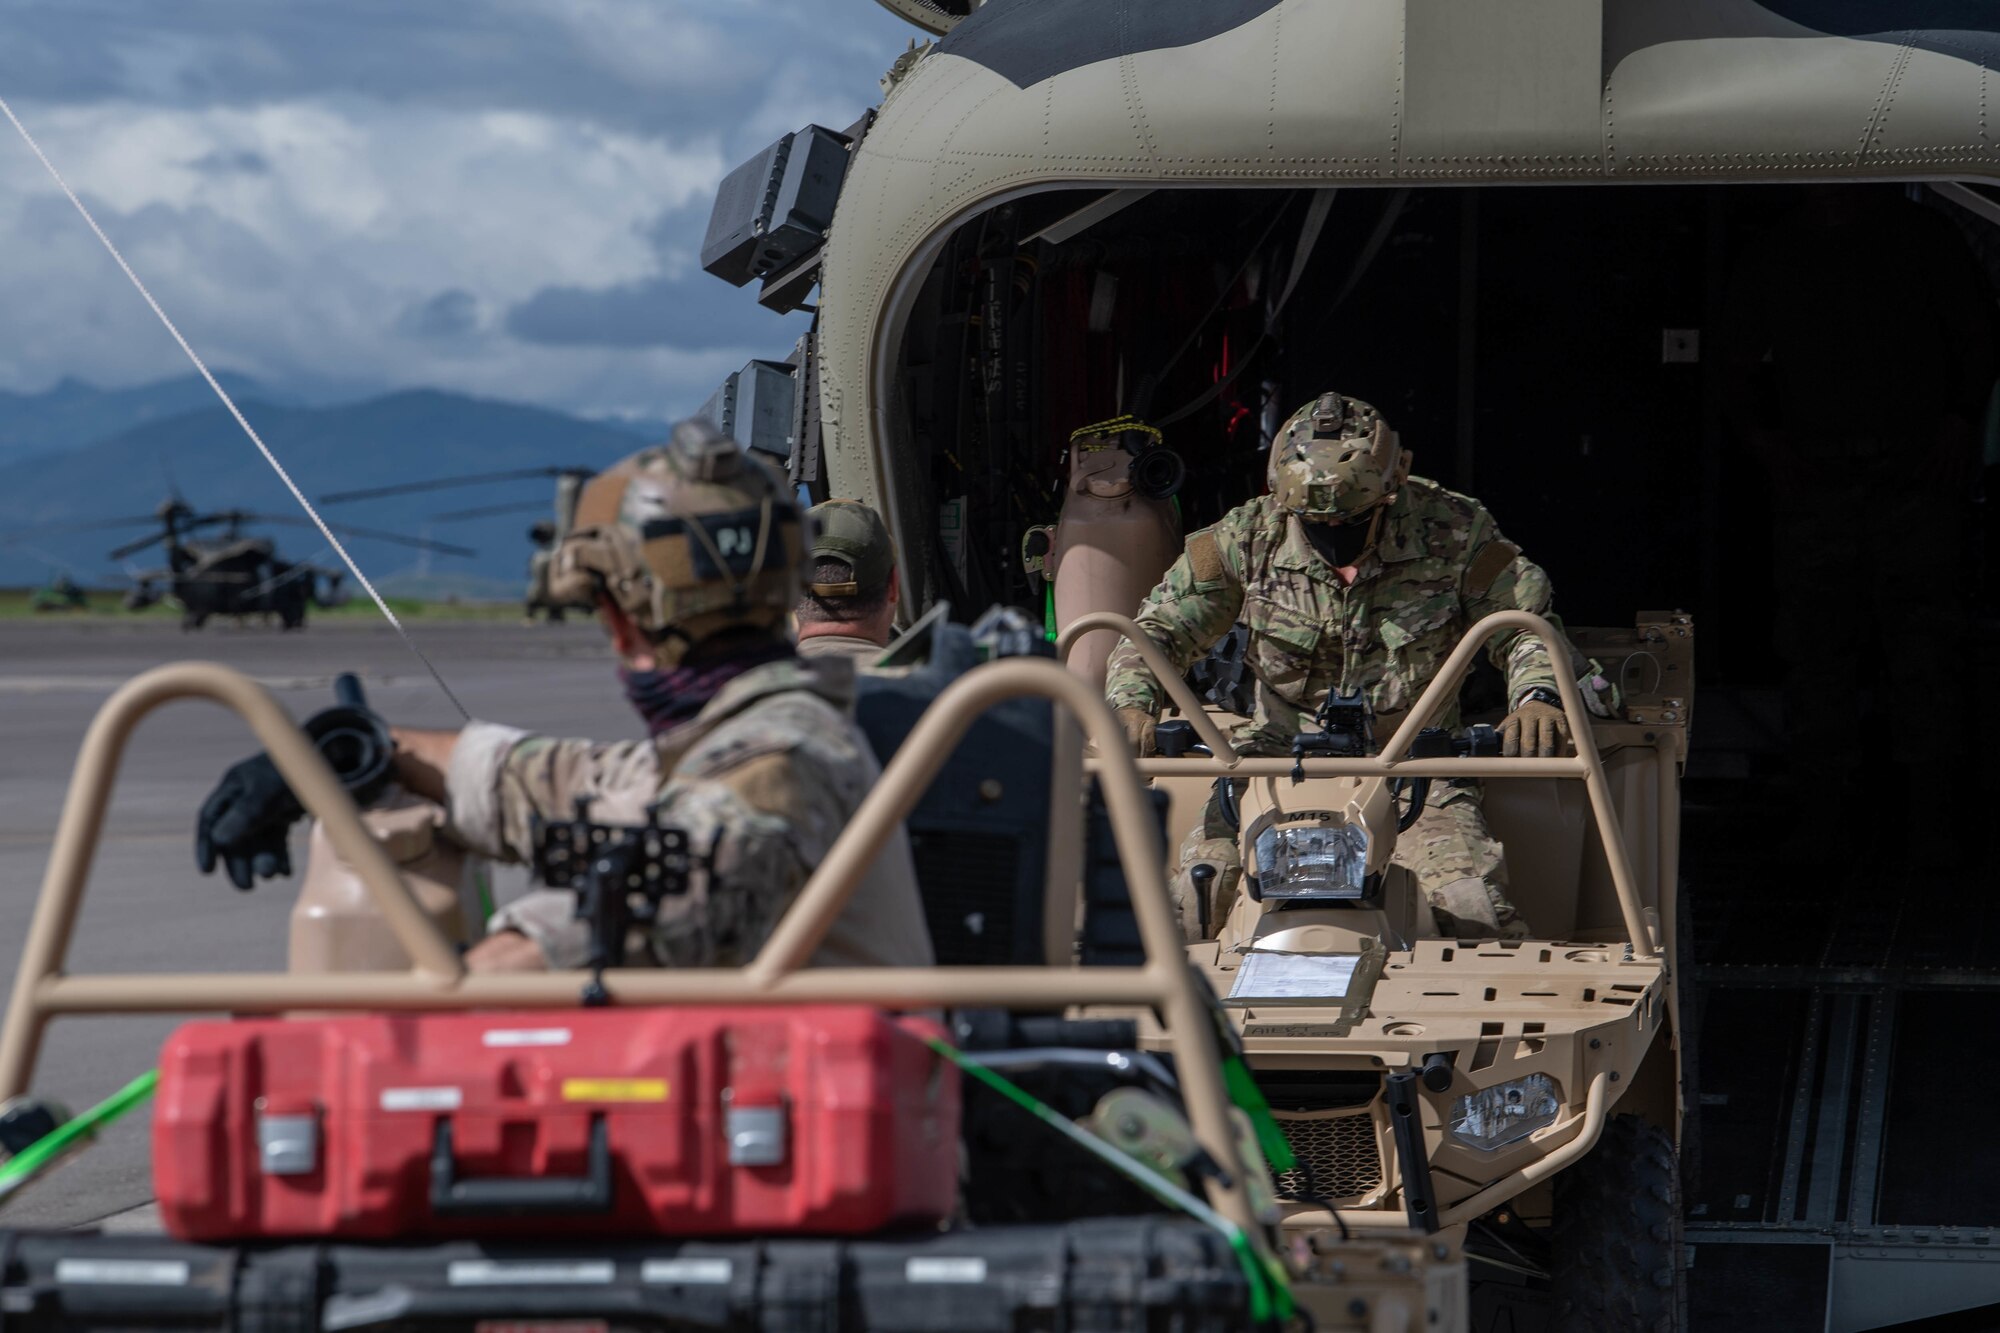 U.S. Air Force Special Tactics operators load tactical vehicles onto a U.S. Army CH-47 Chinook helicopter at Soto Cano Air Base, Honduras, Nov. 23, 2020, while prepping for a landing zone assessment and survey mission.